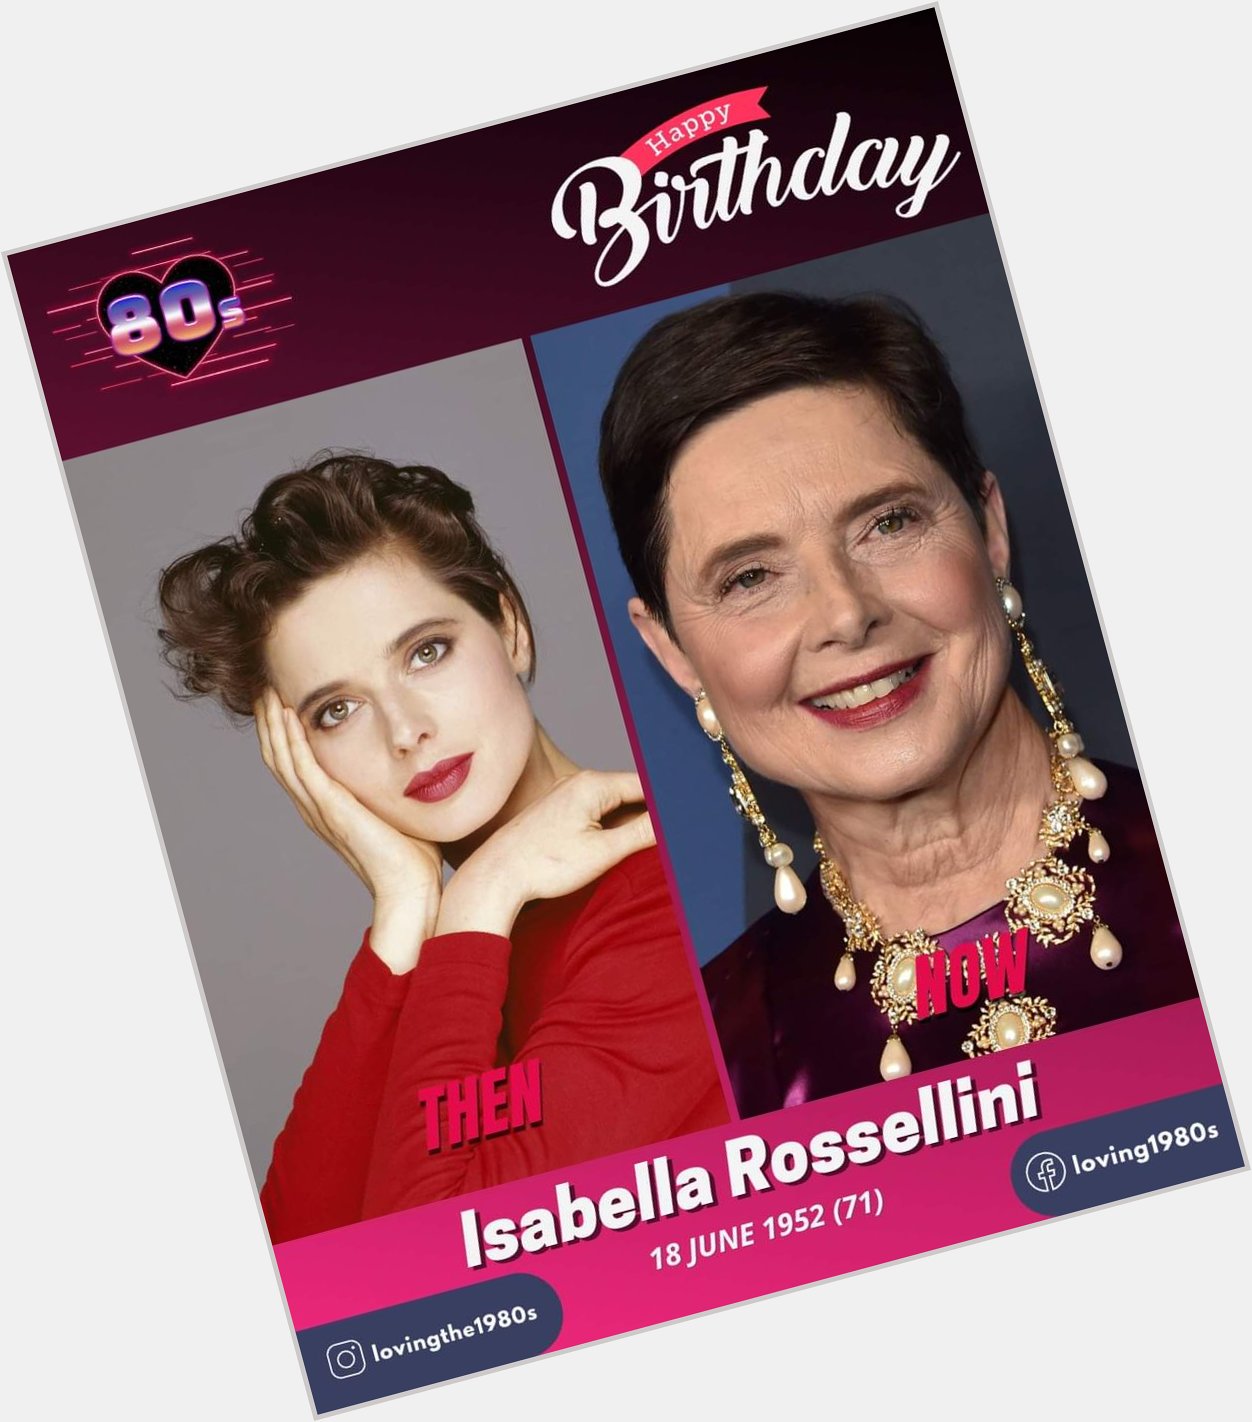 Happy birthday to Isabella Rossellini, who turns 71 today!     